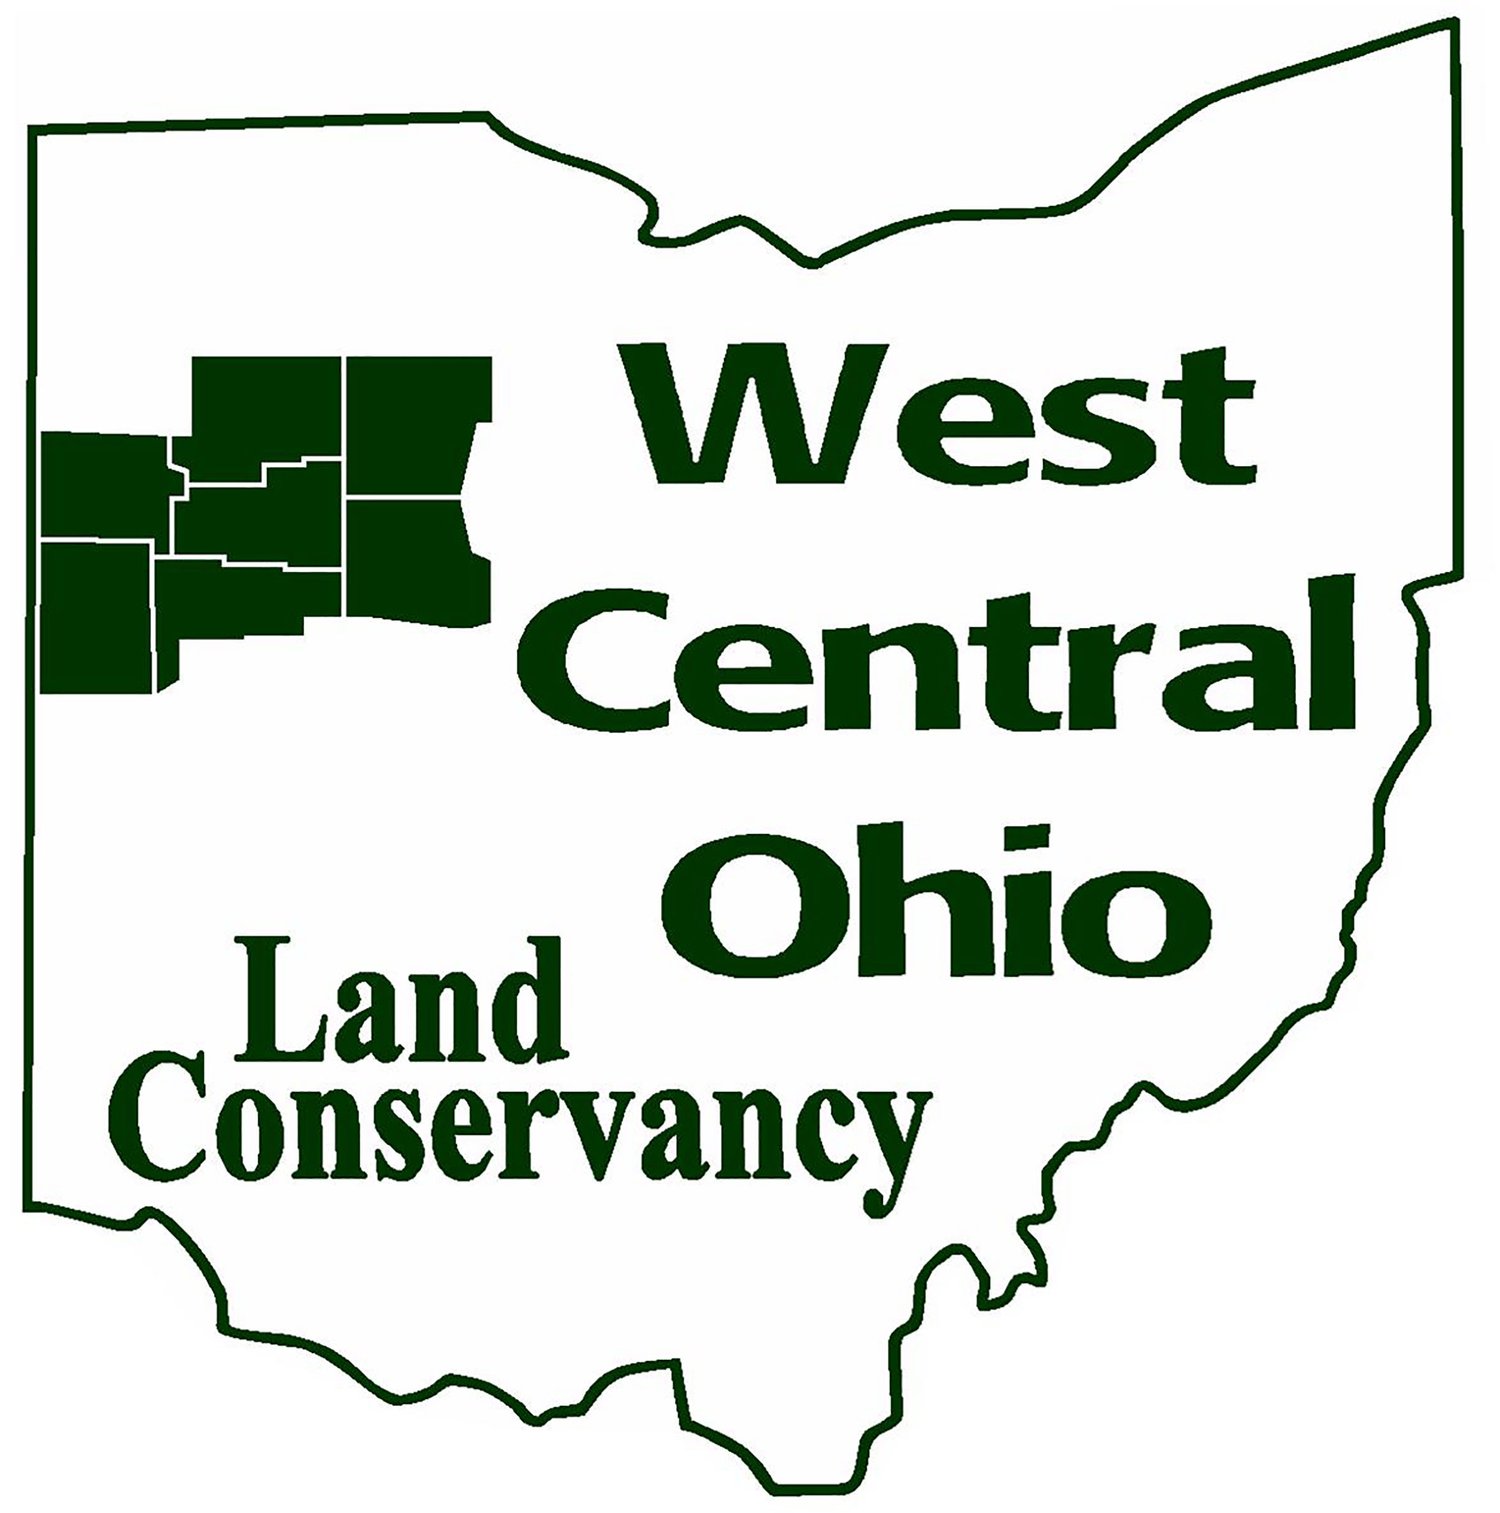 West Central Ohio Land Conservancy